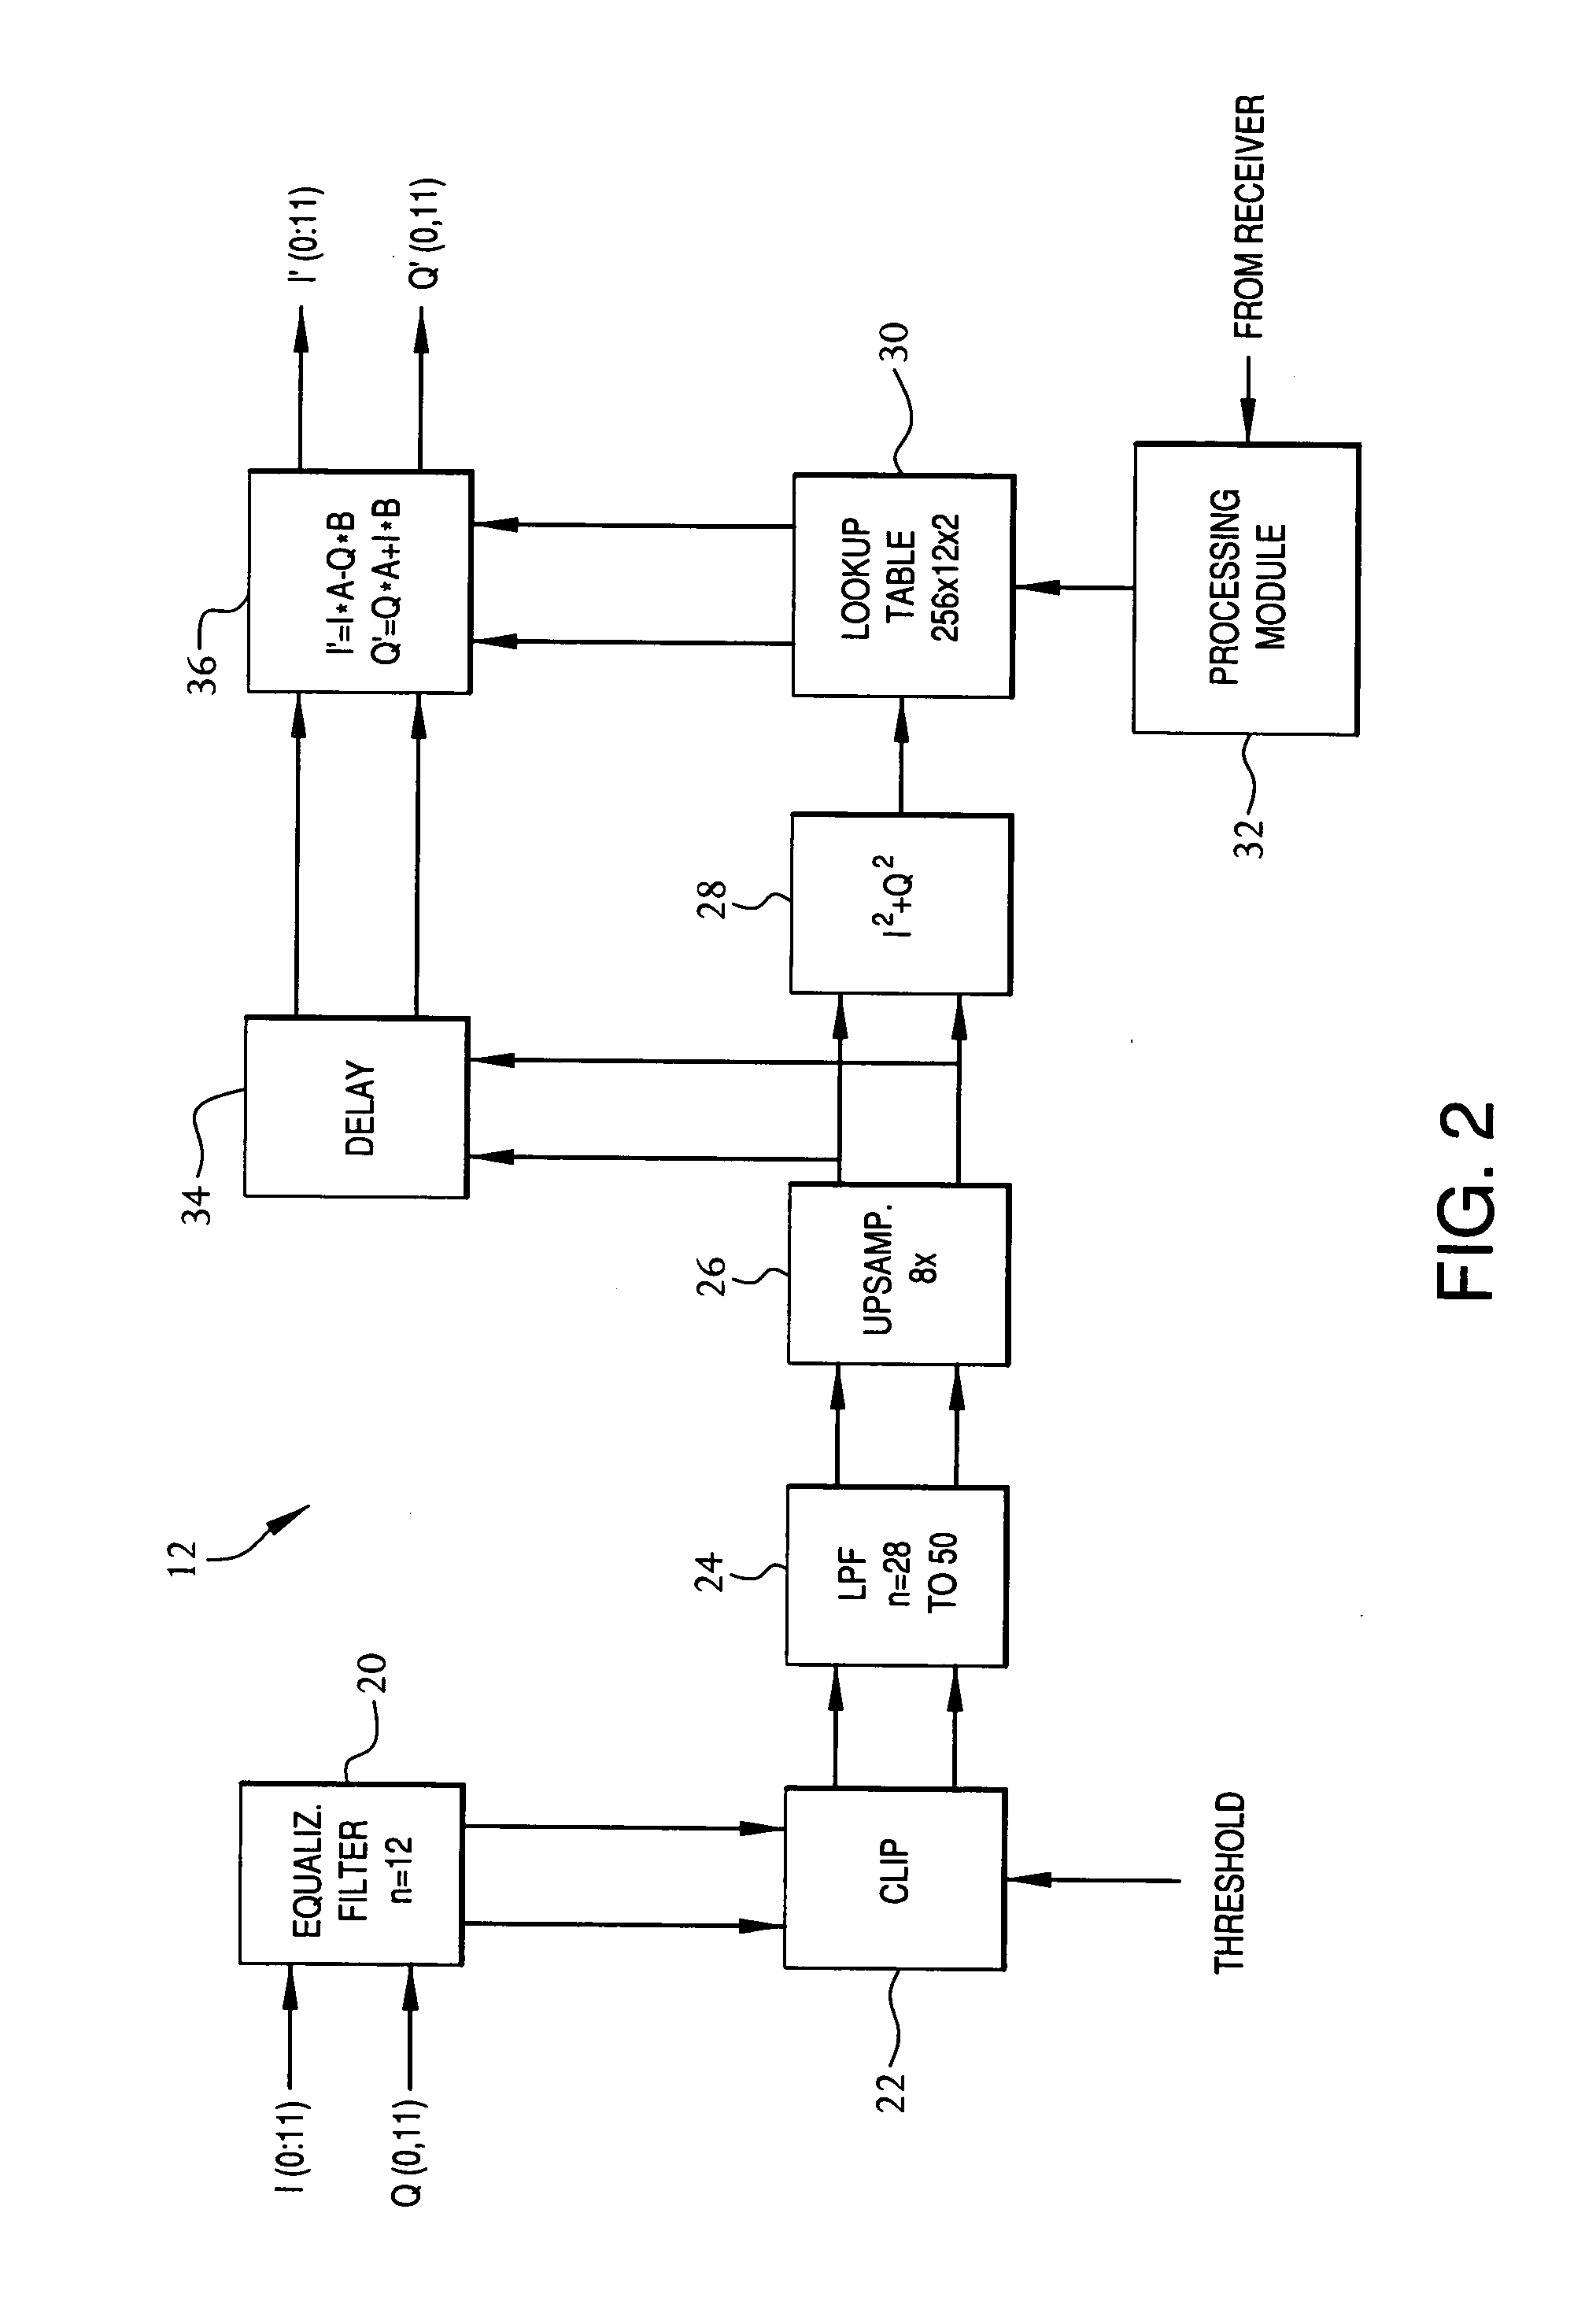 Table-based pre-distortion for amplifier systems